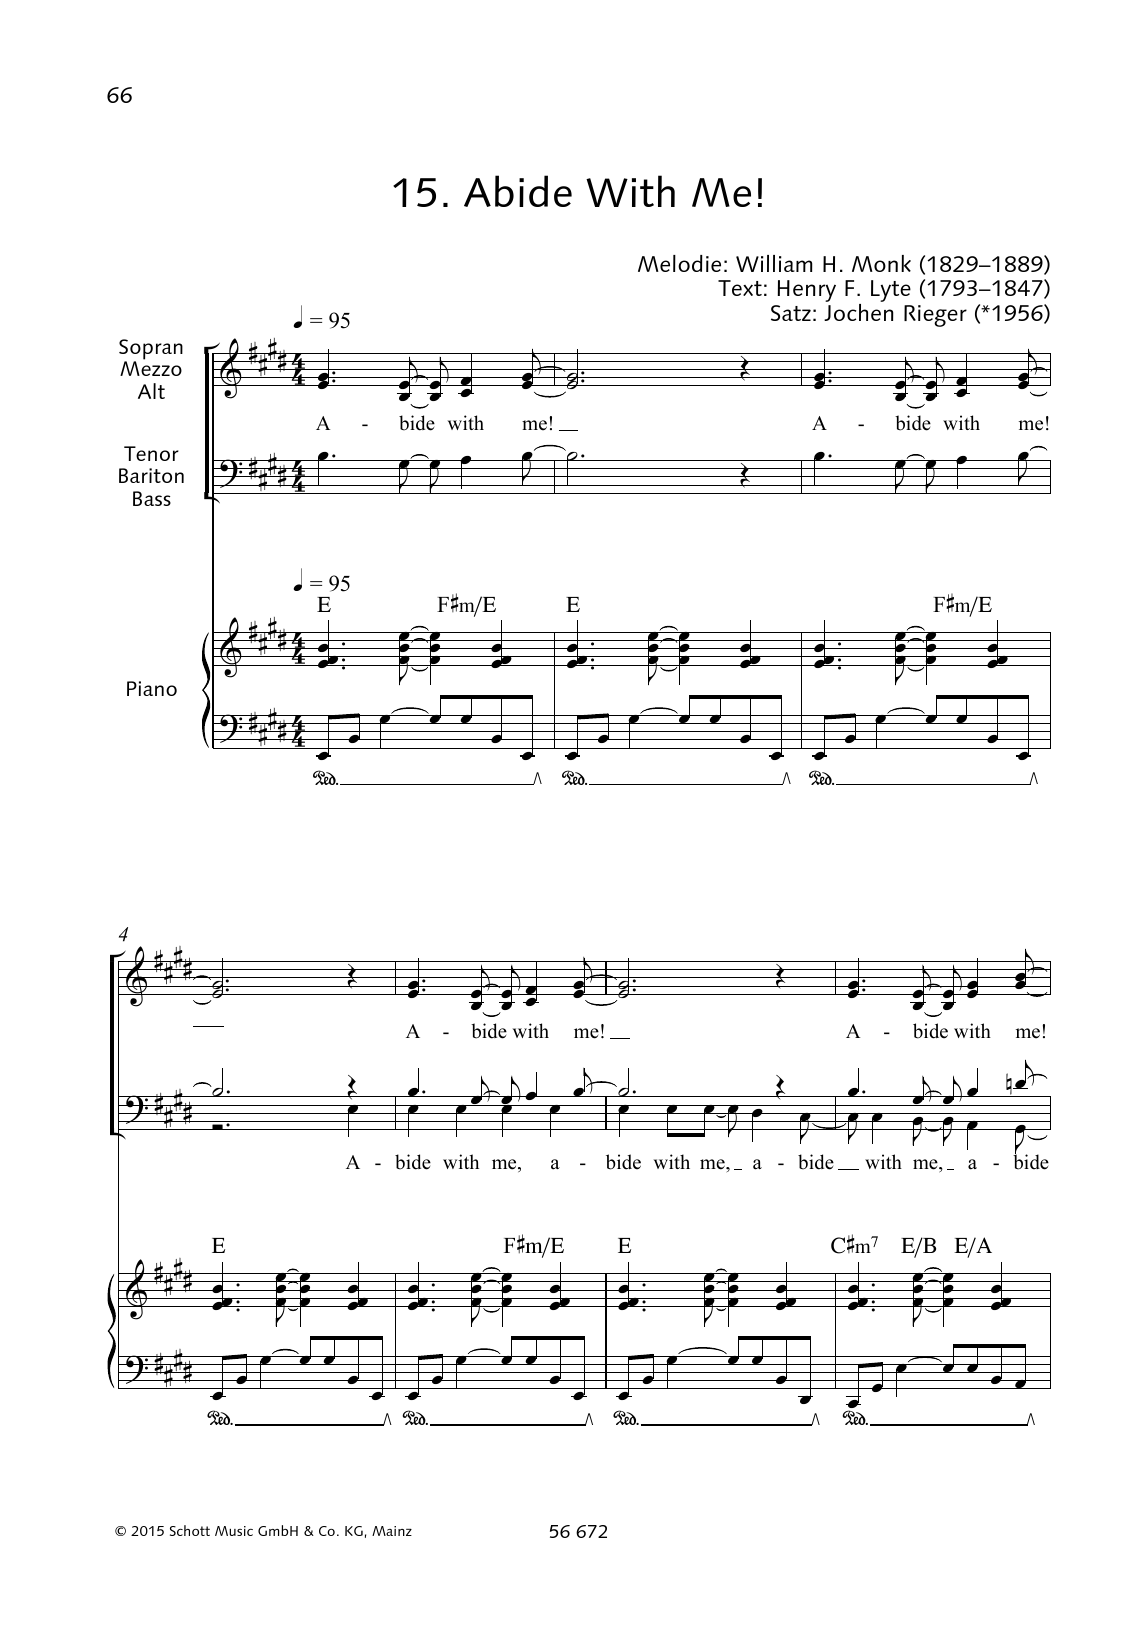 Download Henry Francis Lyte Abide With Me! Sheet Music